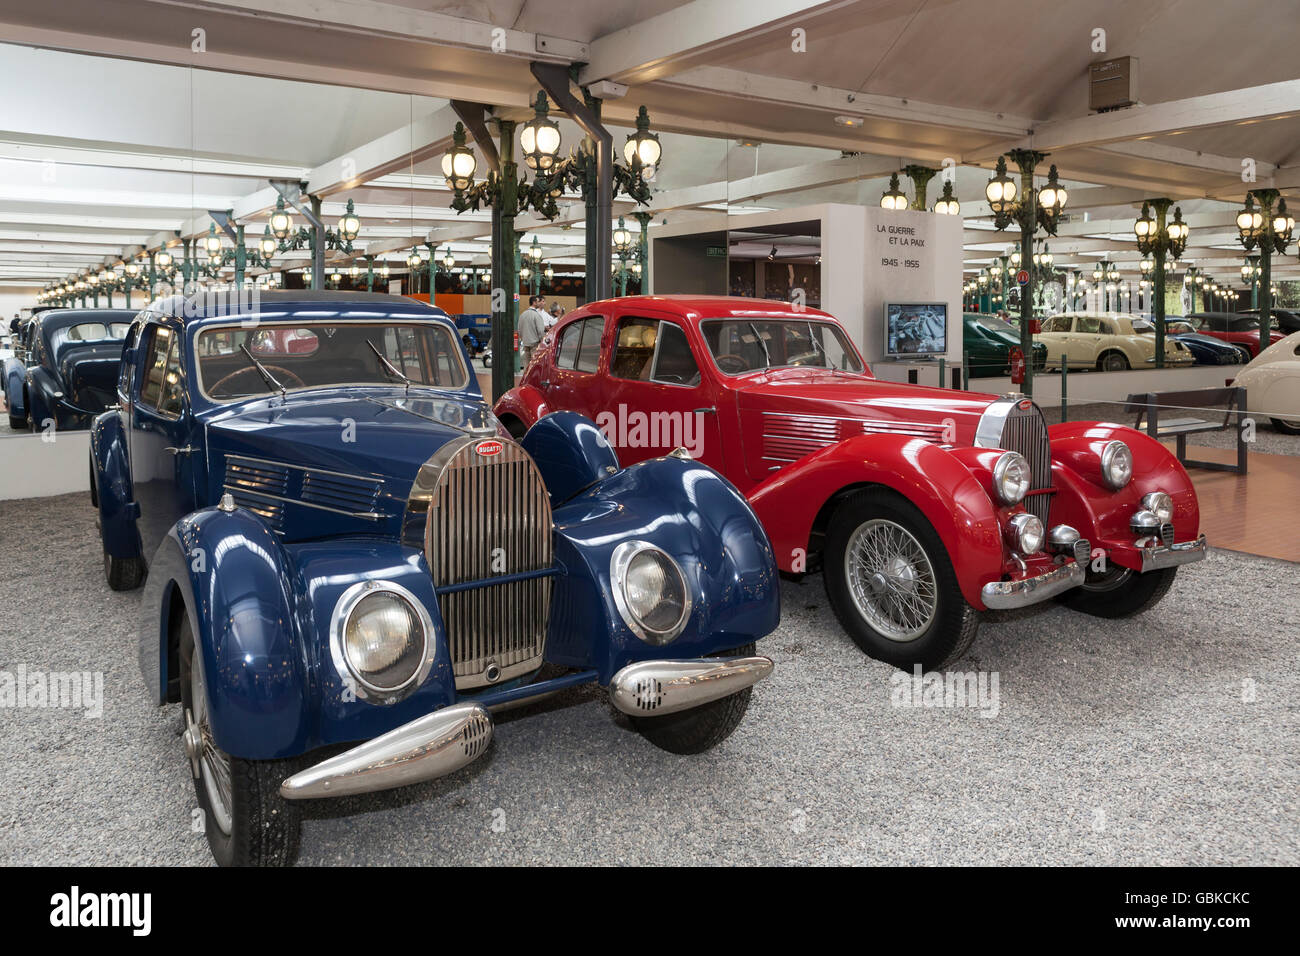 Bugatti Berline Type 57c, built in France, 1938, Schlumpf Collection, National Museum, National Automobile Museum, Mulhouse Stock Photo